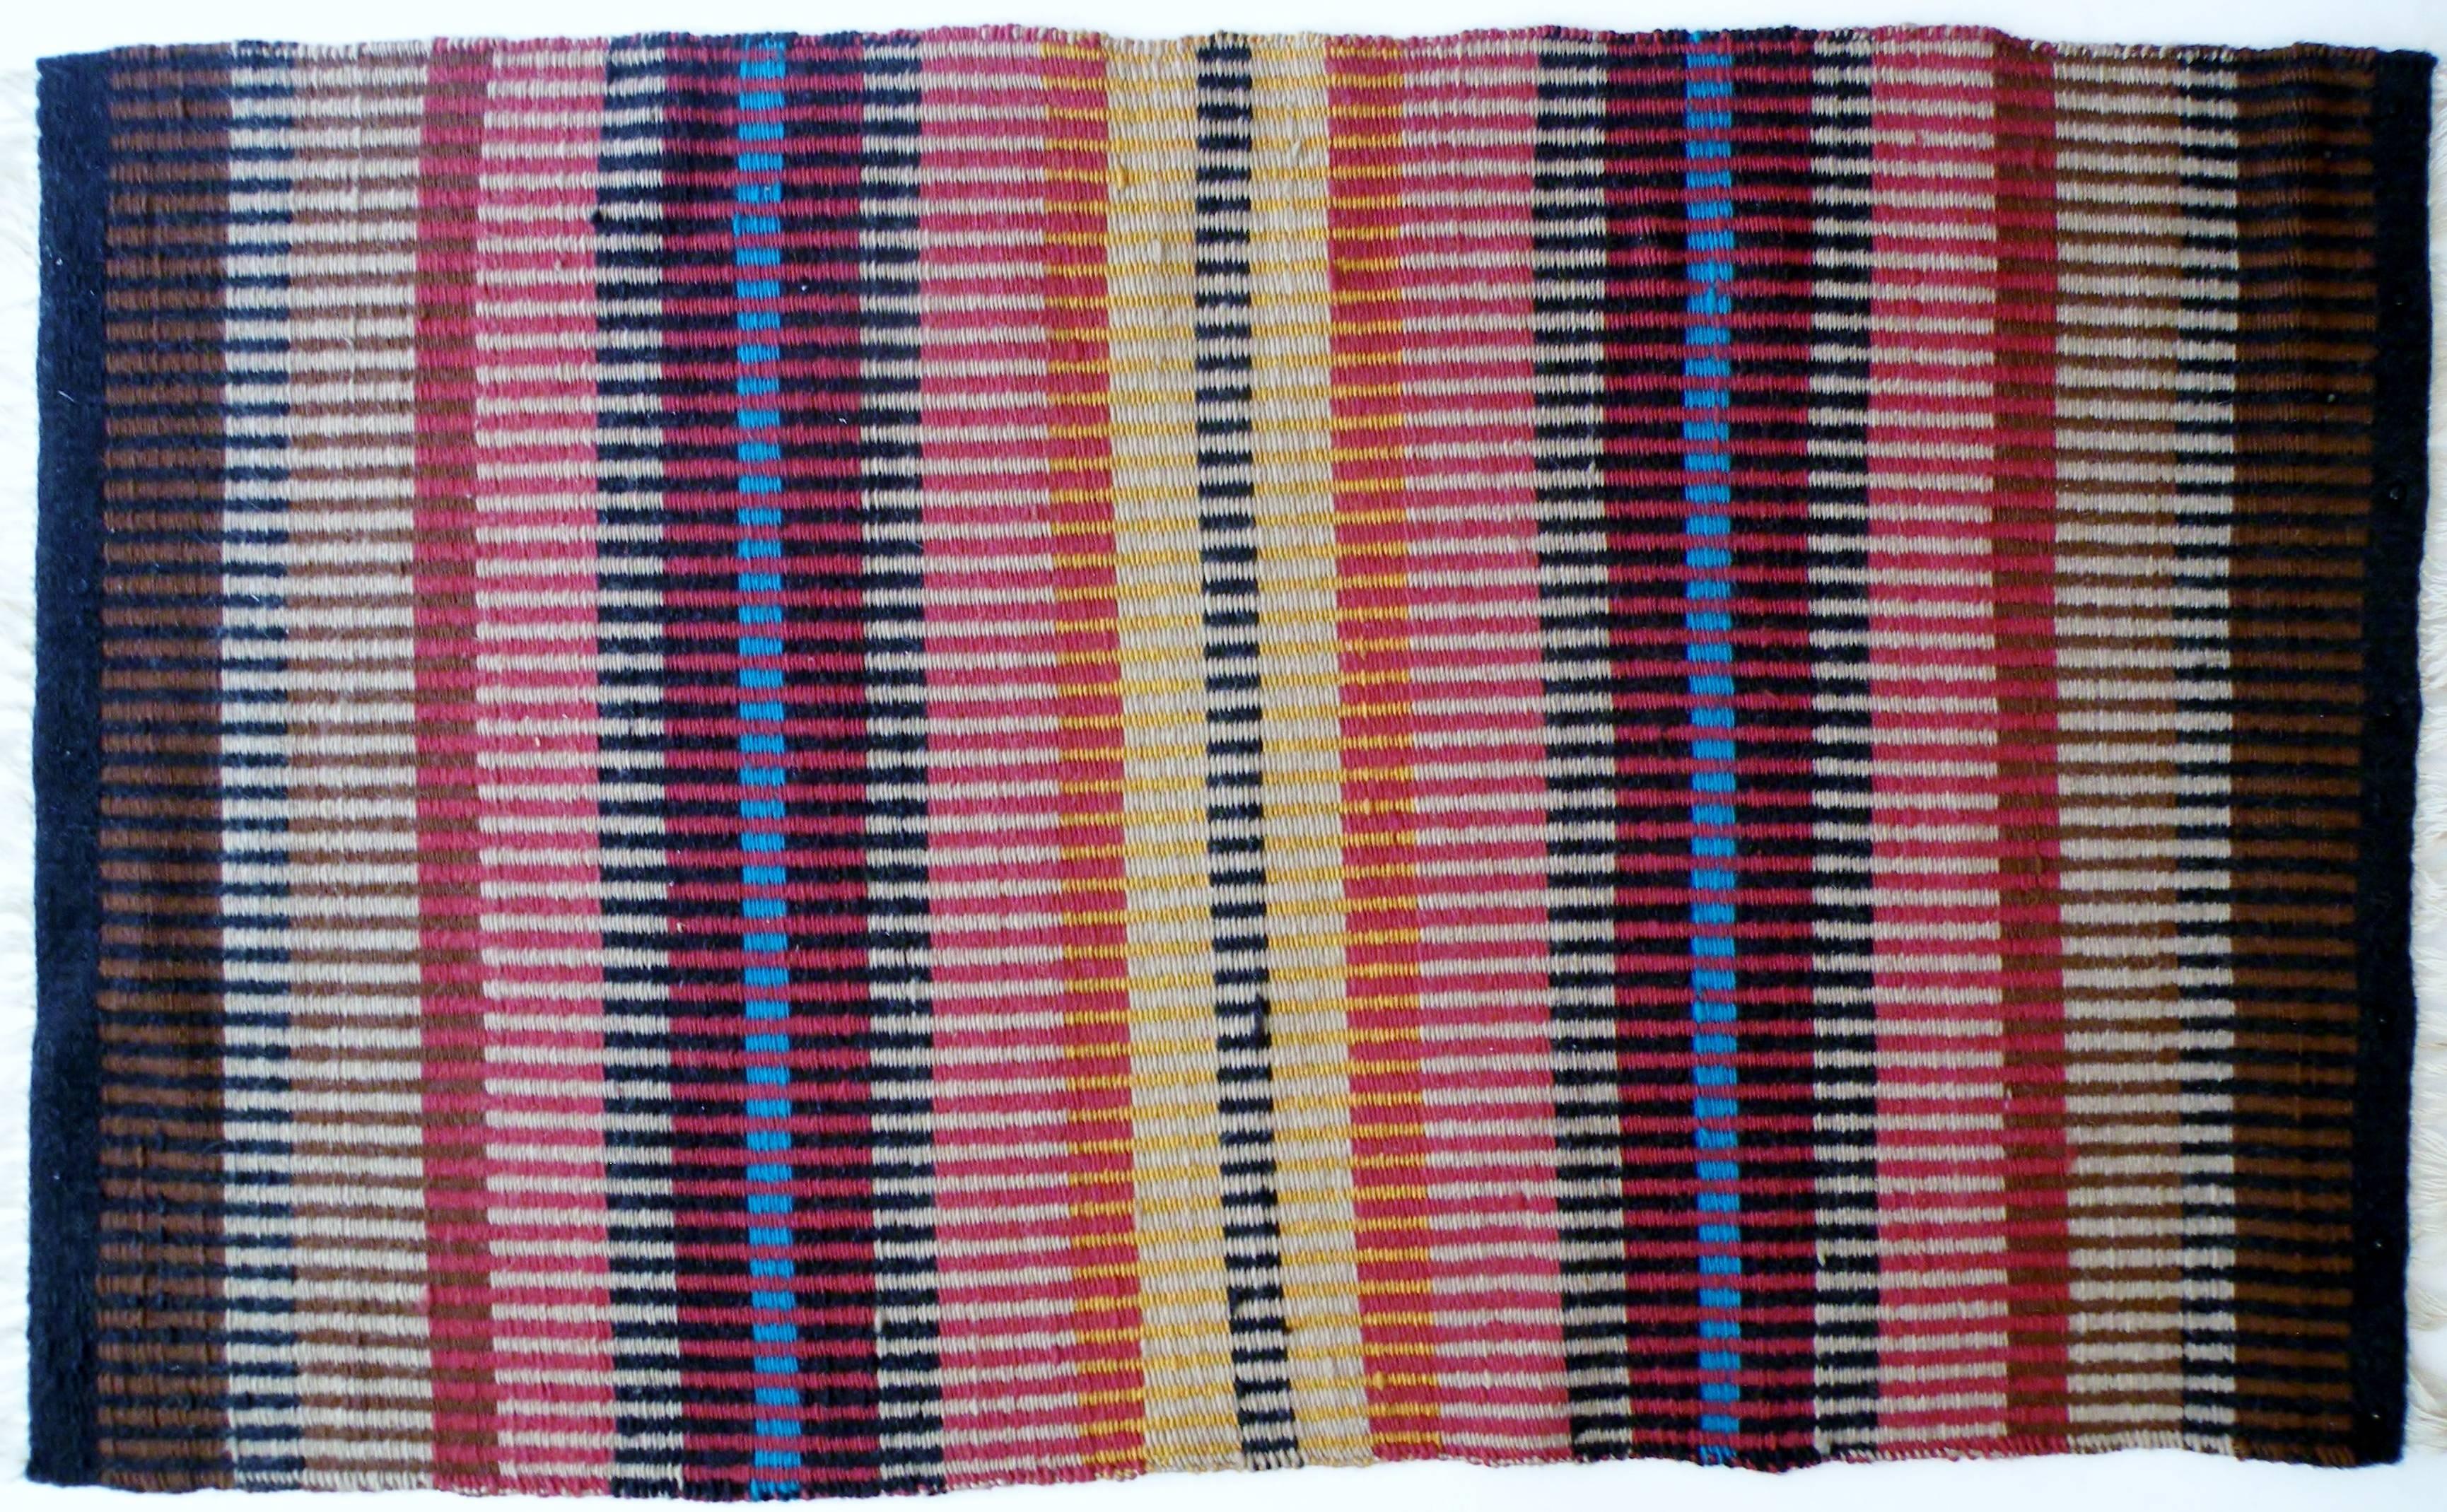 Handwoven vintage modernist American California craft textile rug or wall decoration with a Bauhaus inspired linear abstract pattern. Measure: 32